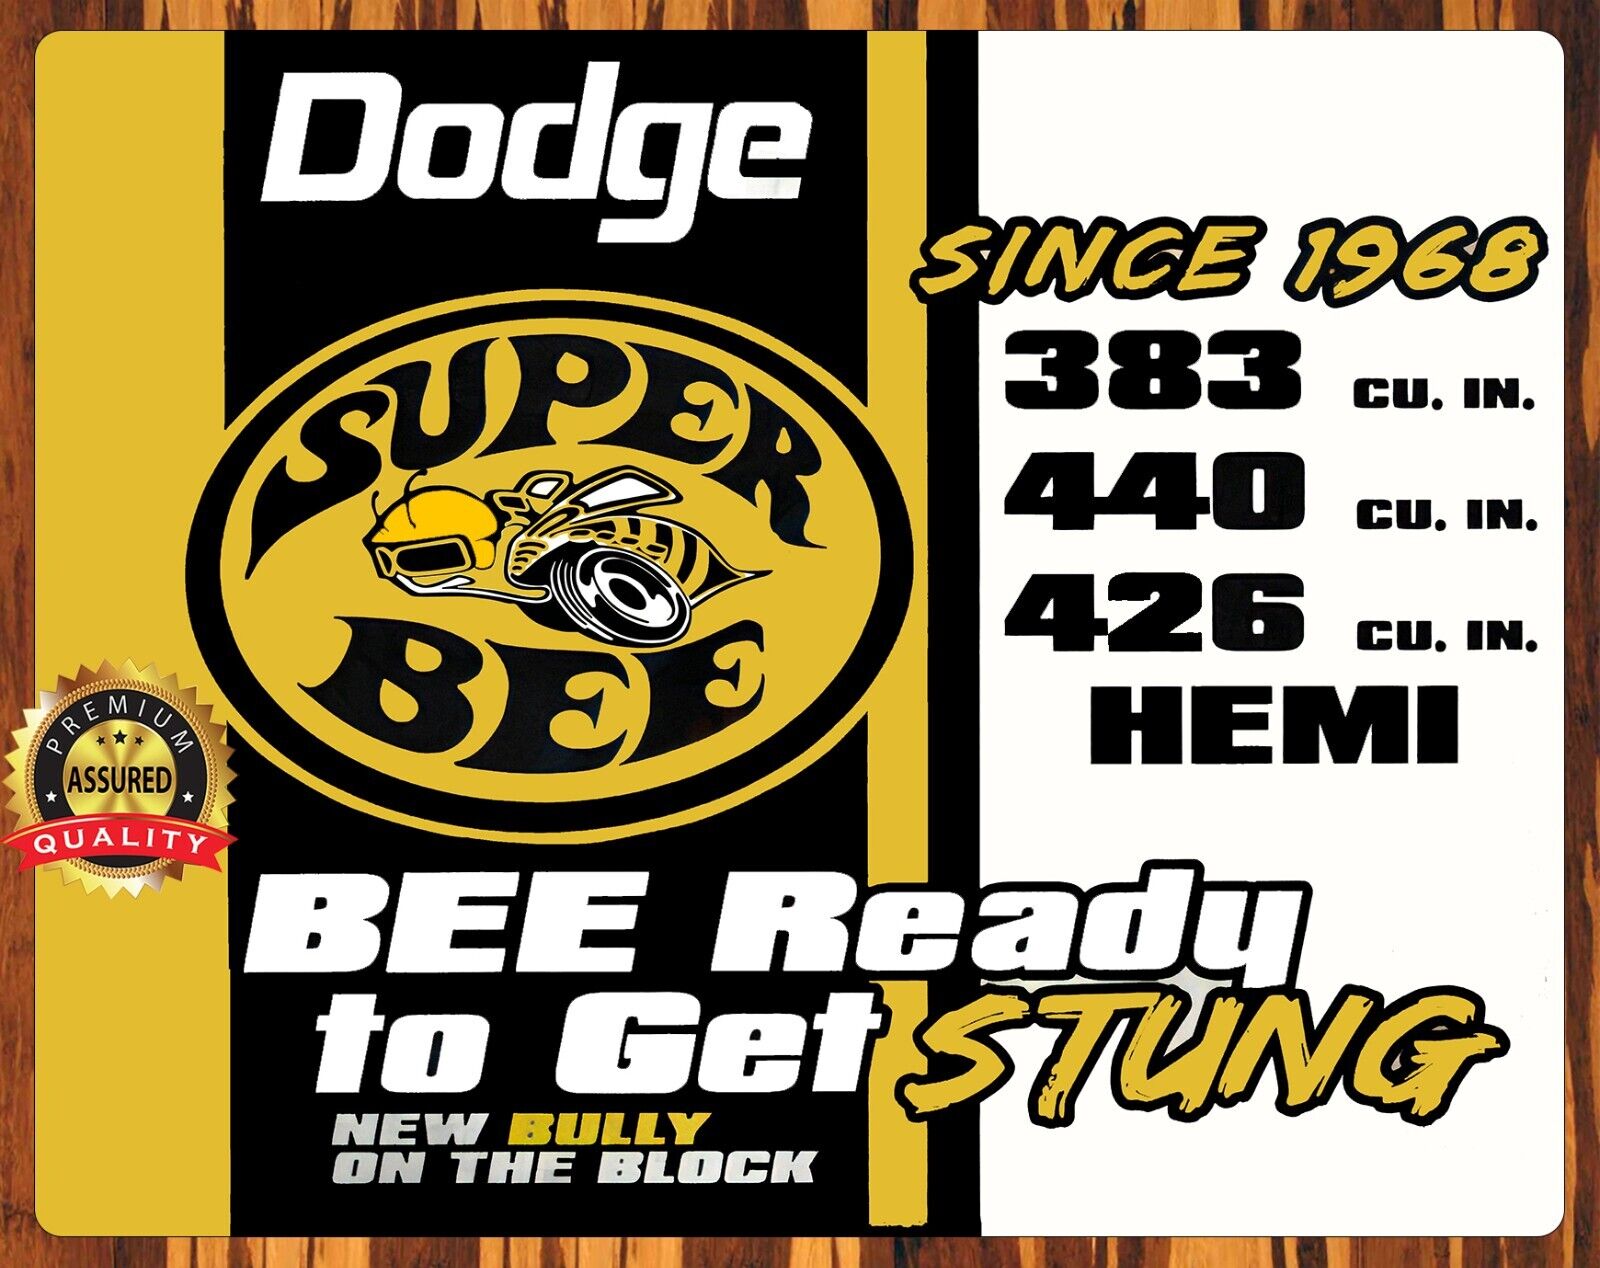 Dodge - Super Bee - Bee Ready To Get Stung - Metal Sign 11 x 14